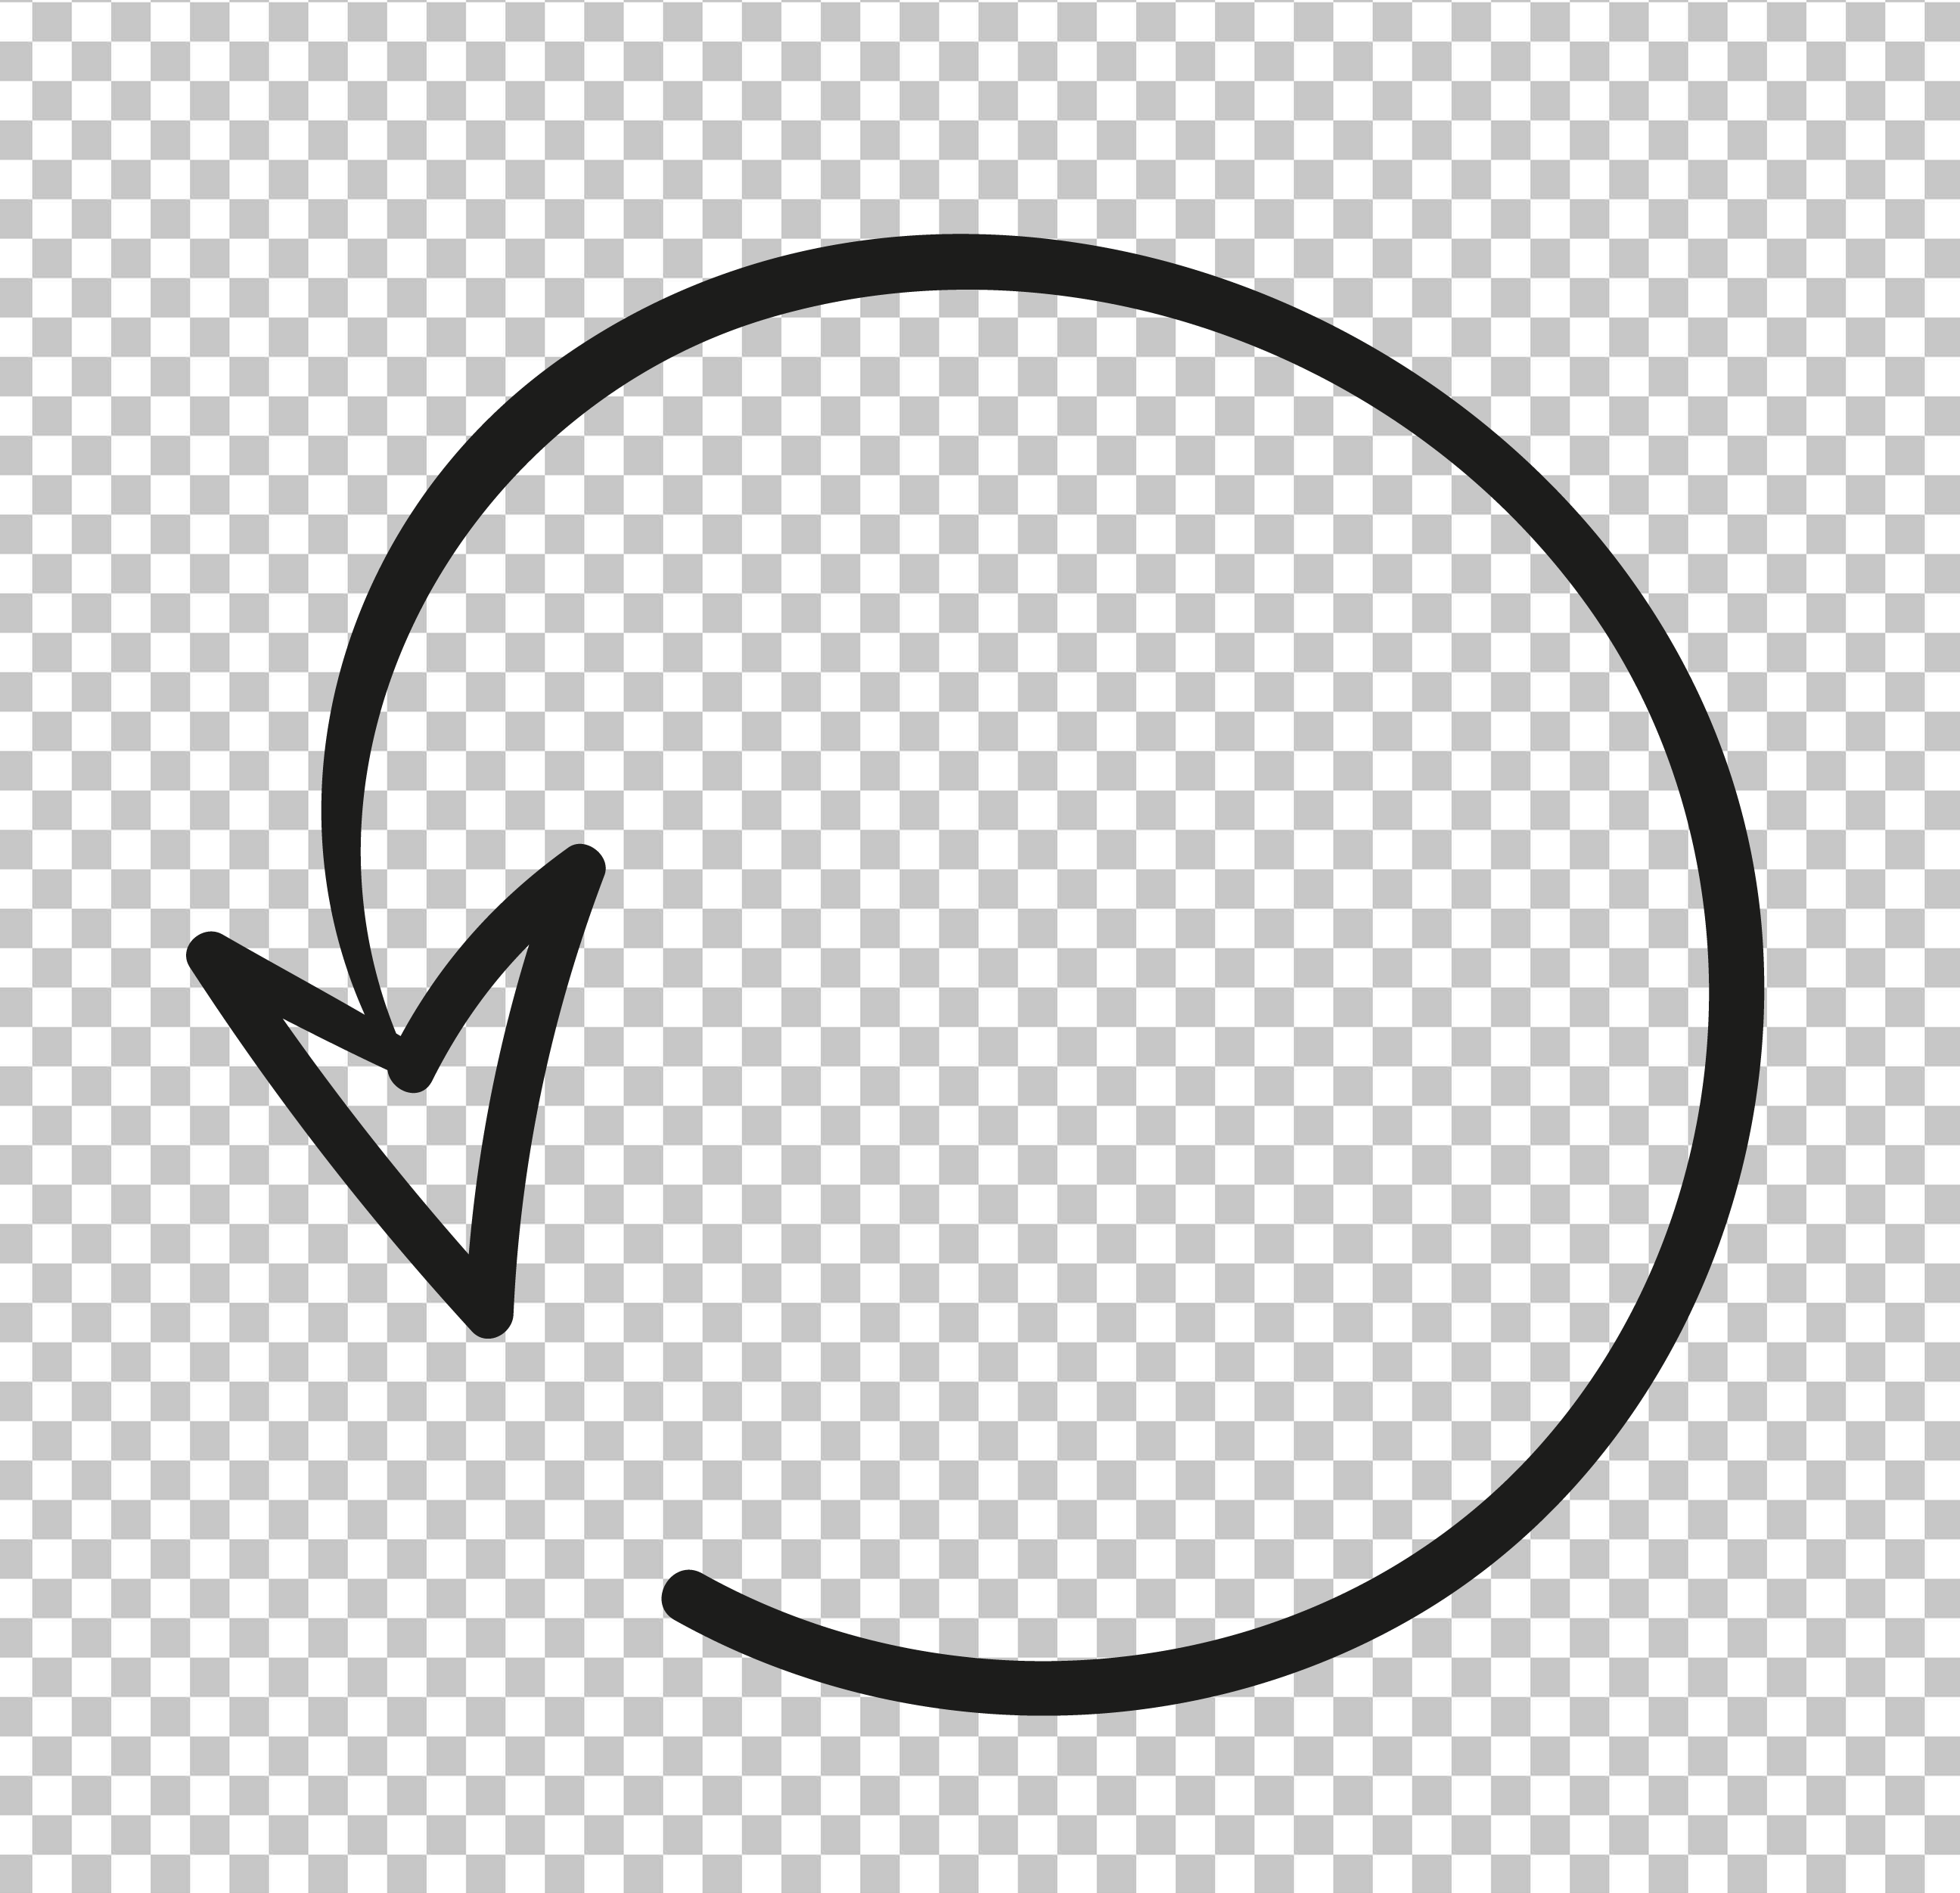 Hand-Drawn Circle with Arrow PNG Image